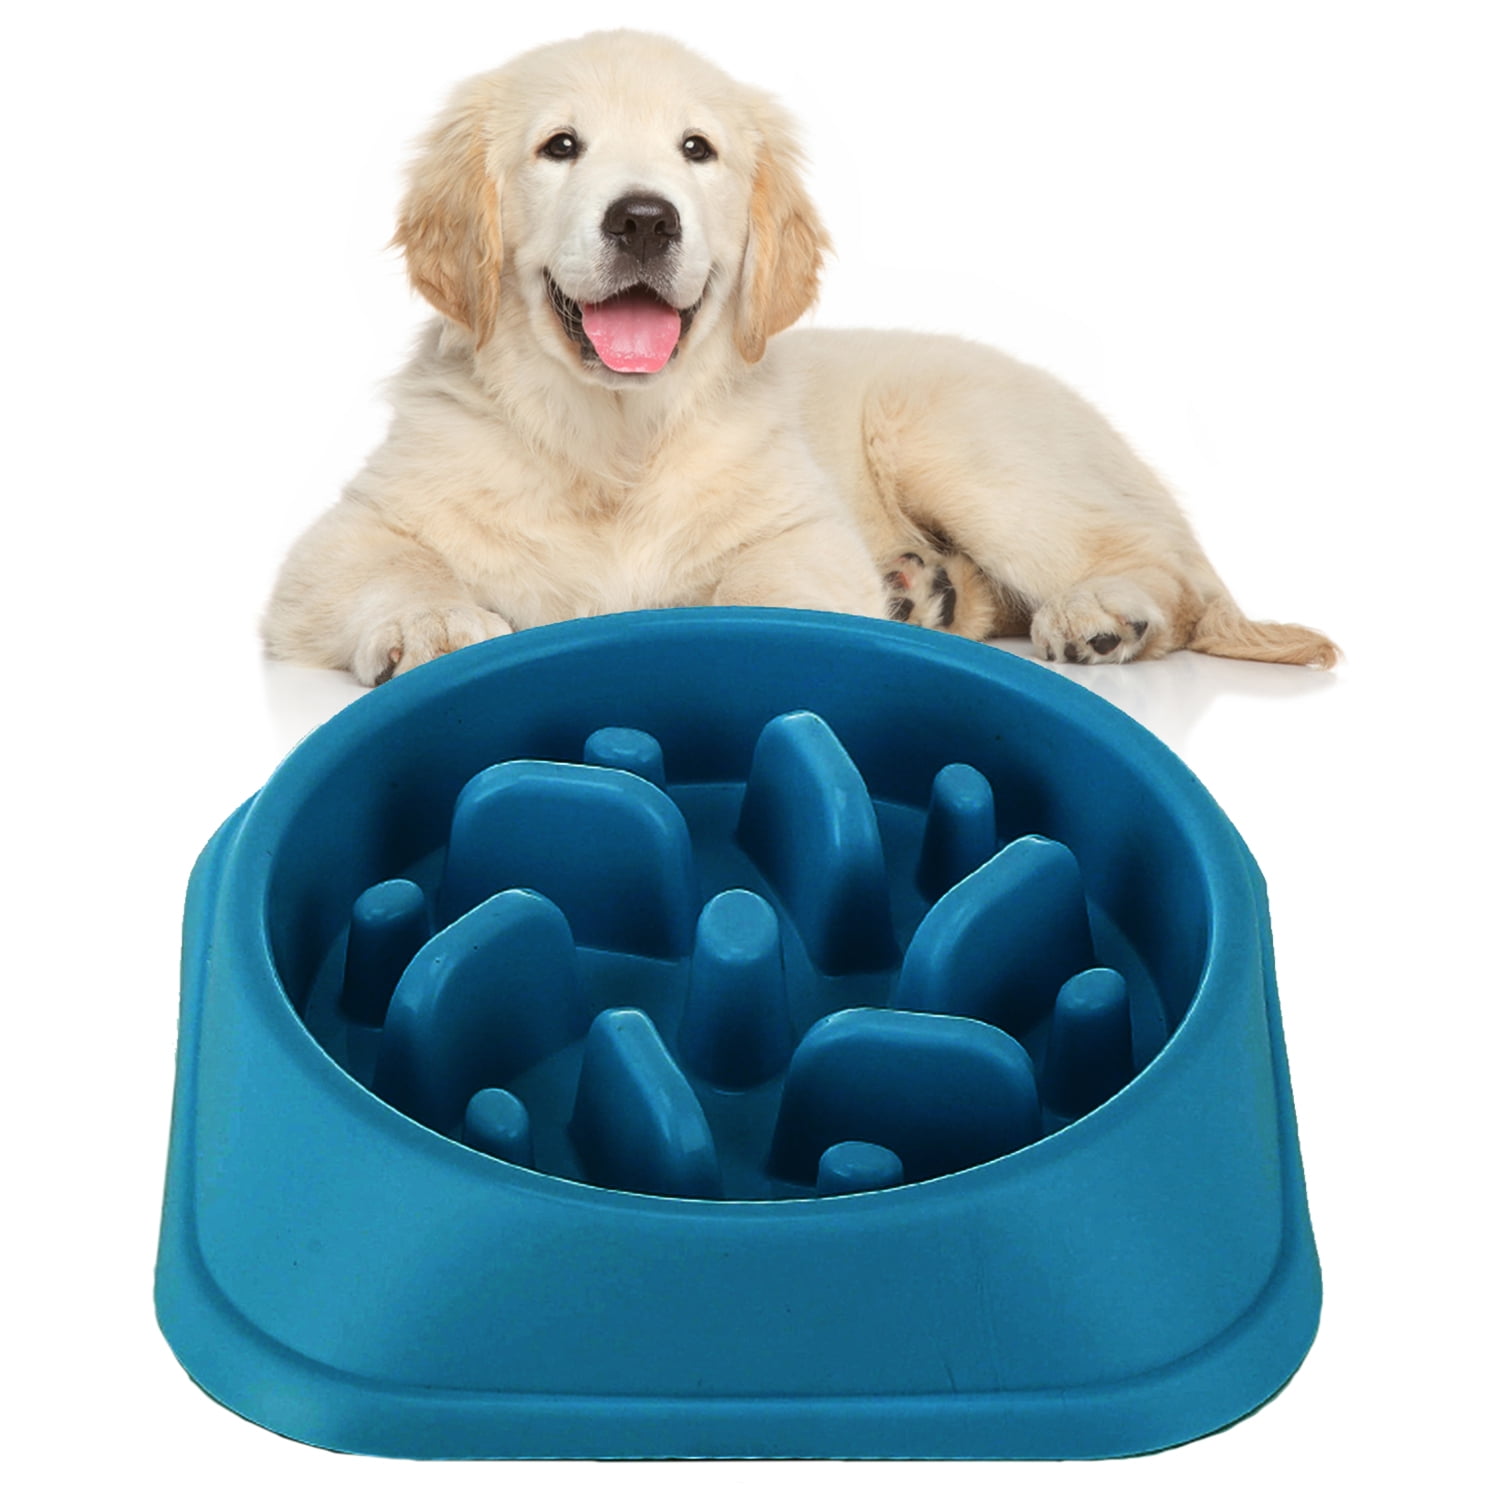 Benepaw Interactive Slow Feeder Dog Bowl Nonslip Maze For All Dog Sizes ▻   ▻ Free Shipping ▻ Up to 70% OFF